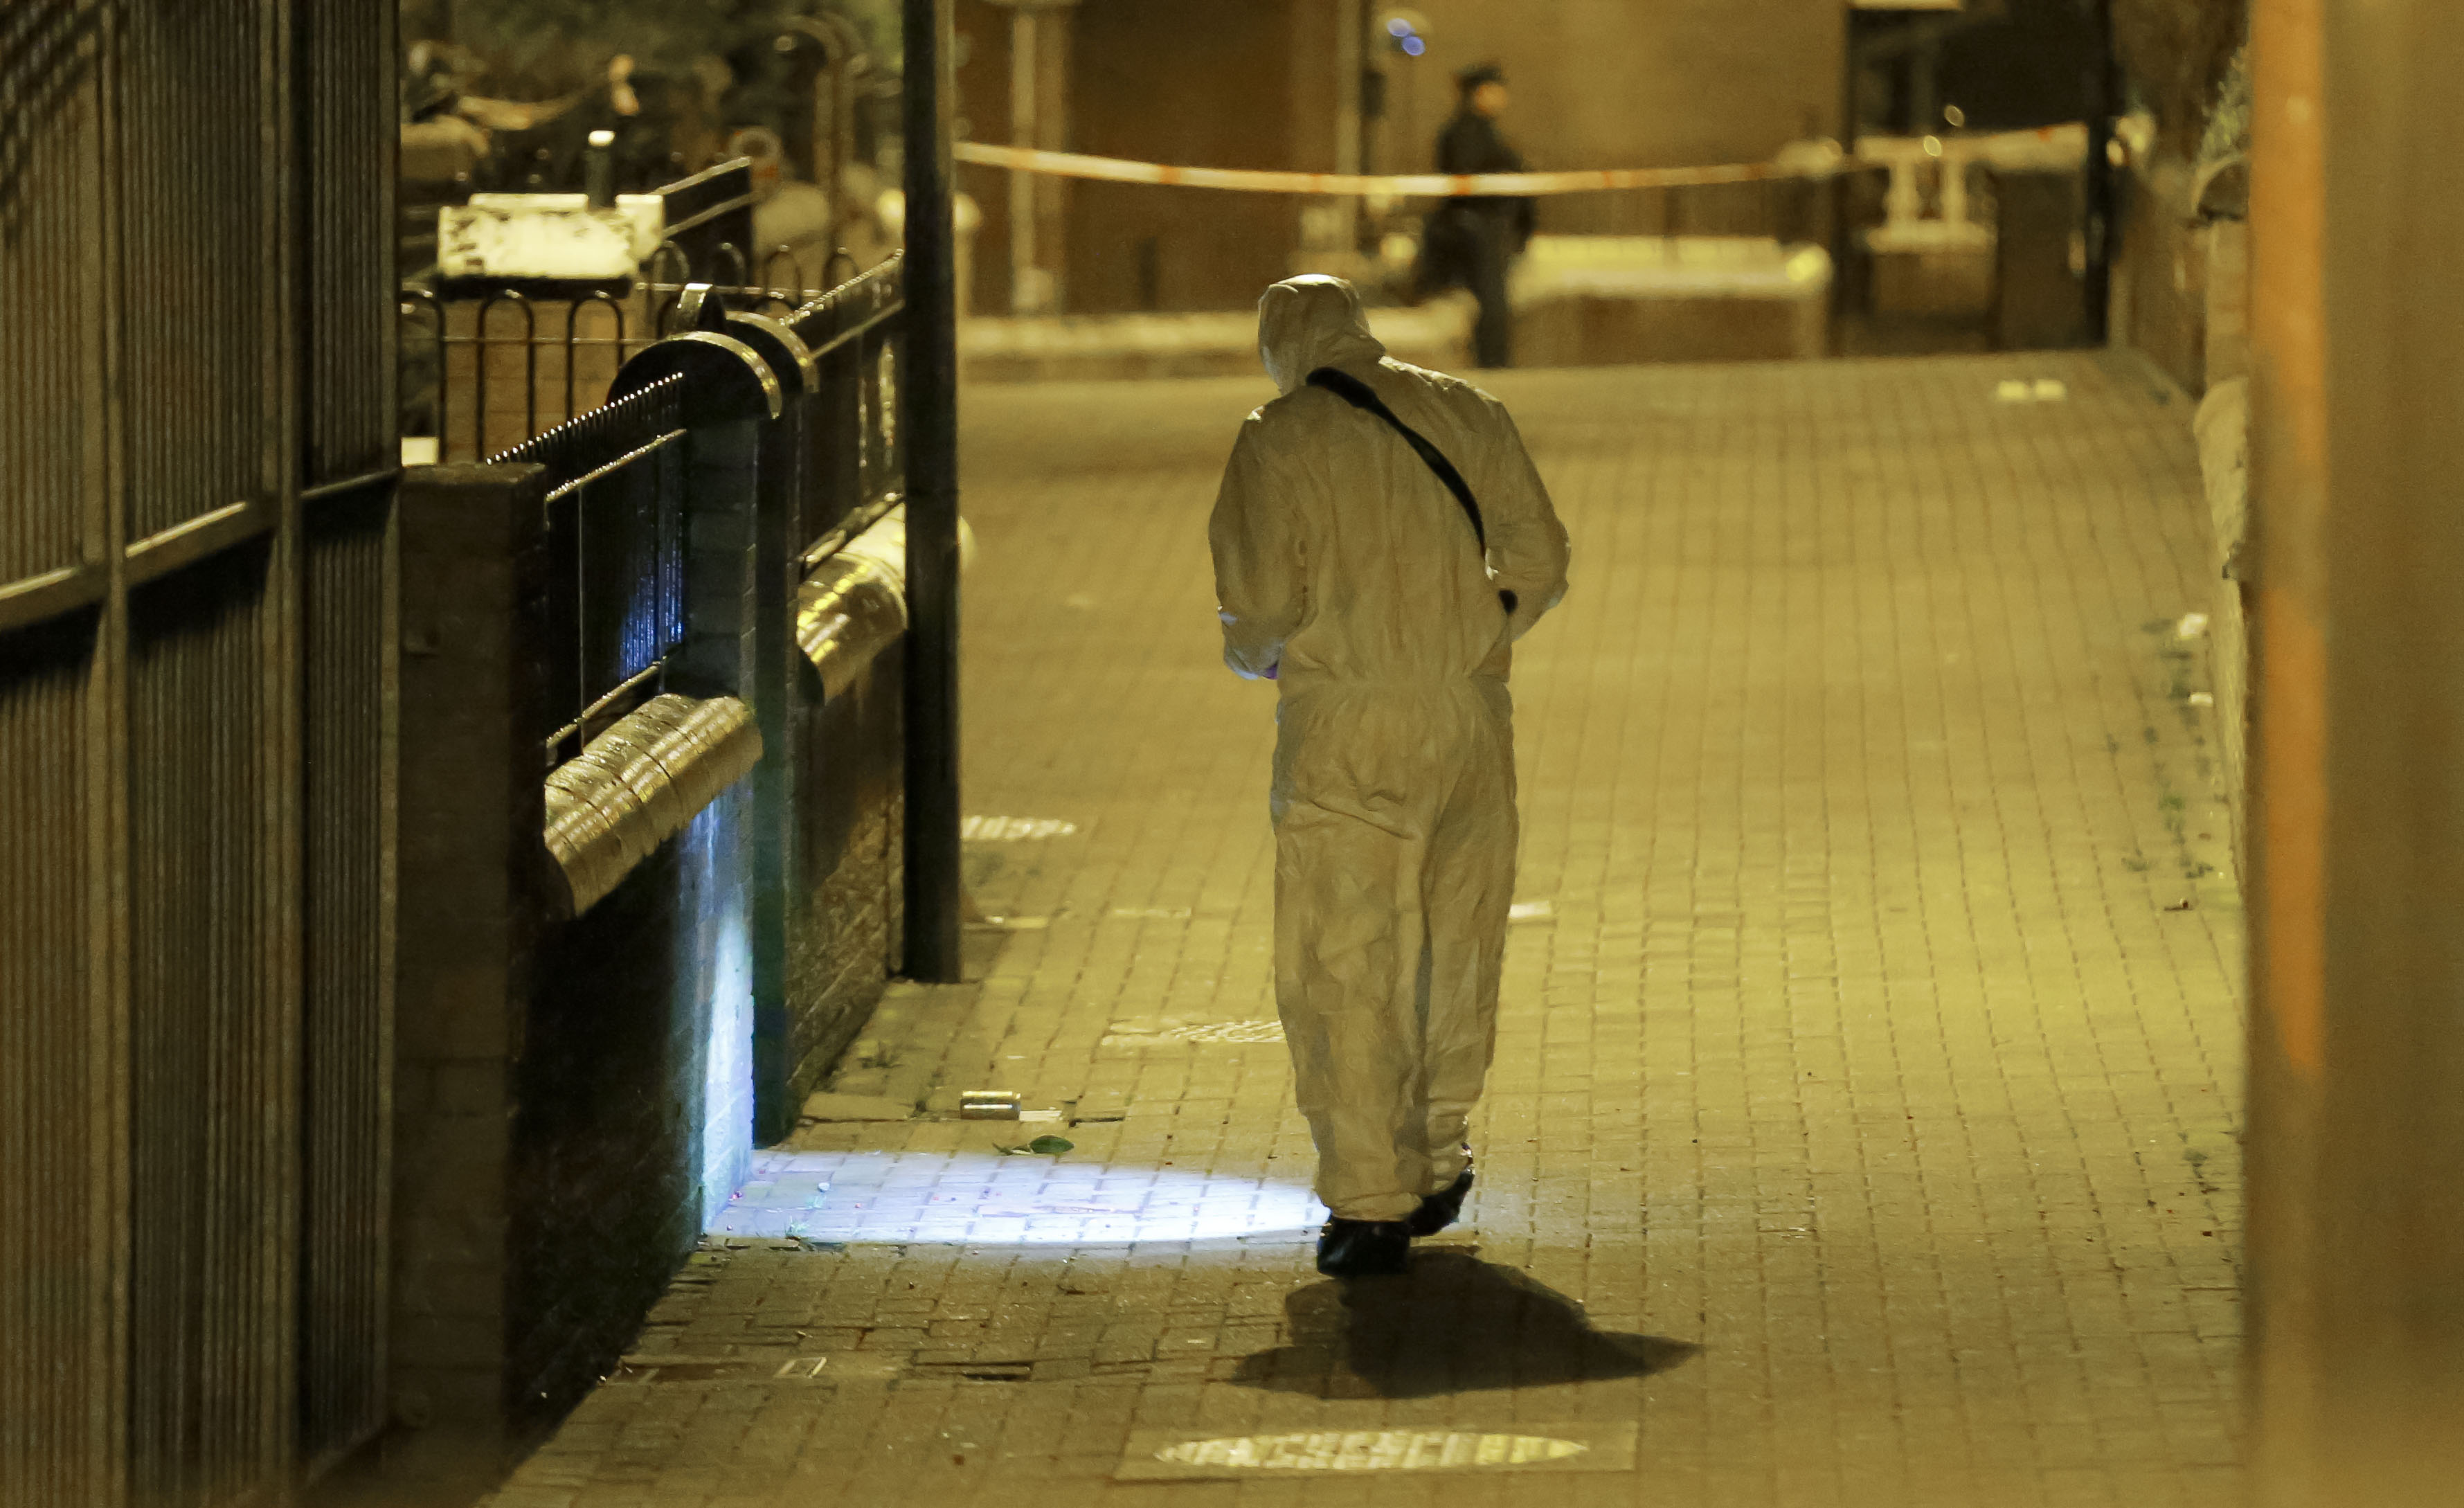 A PSNI forensic officer at the scene of the shooting of Michael McGibbon